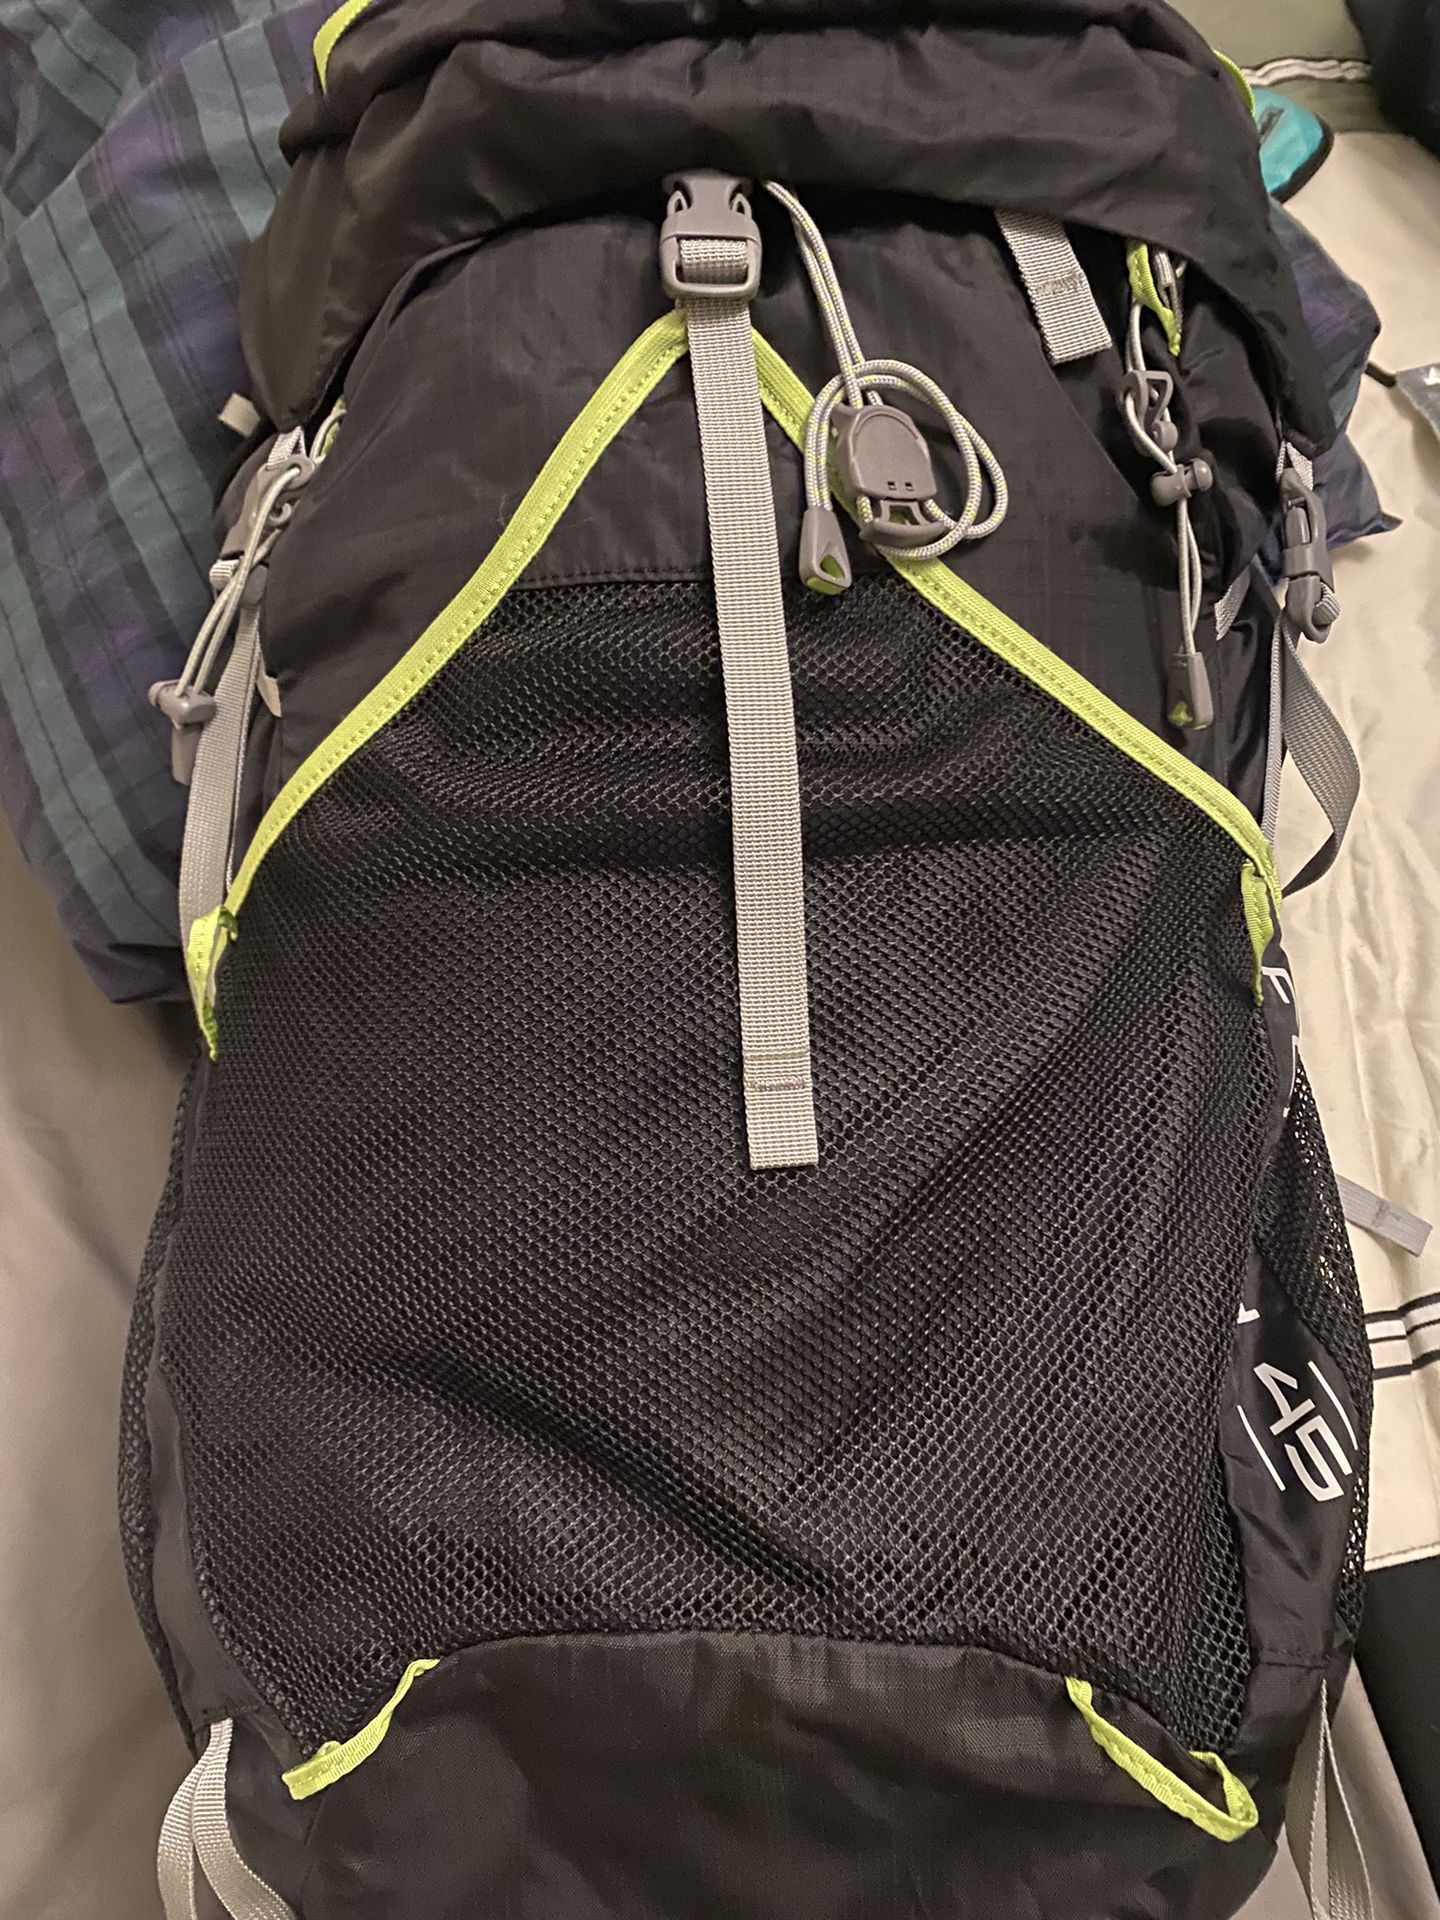 REI Flash 45 Men’s Backpack For Hiking Camping